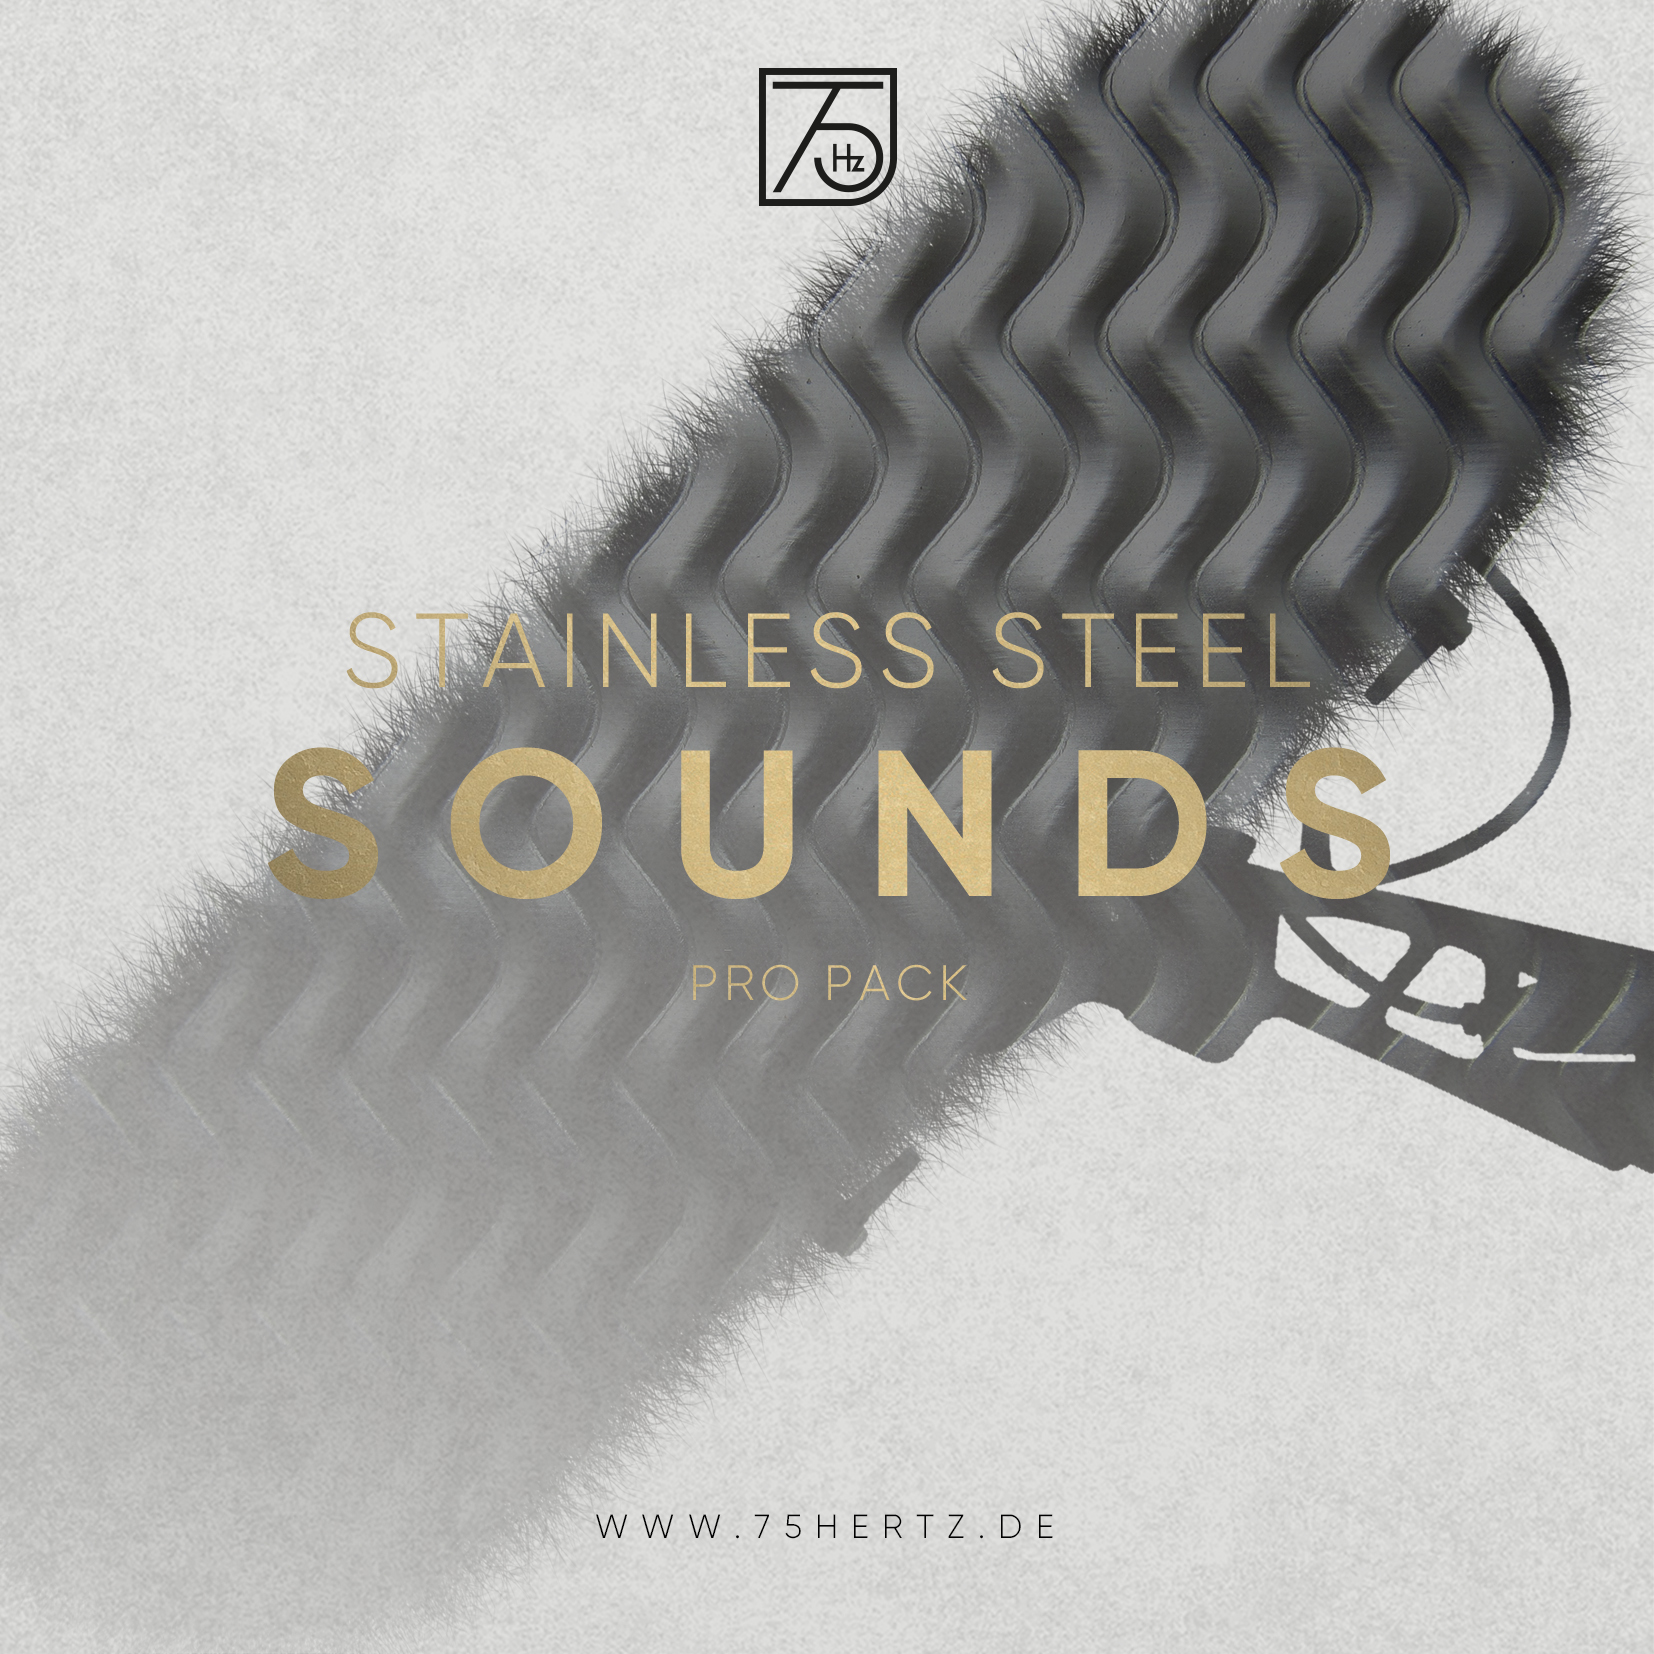 Read more about the article Stainless steel Sounds – Pro Pack​